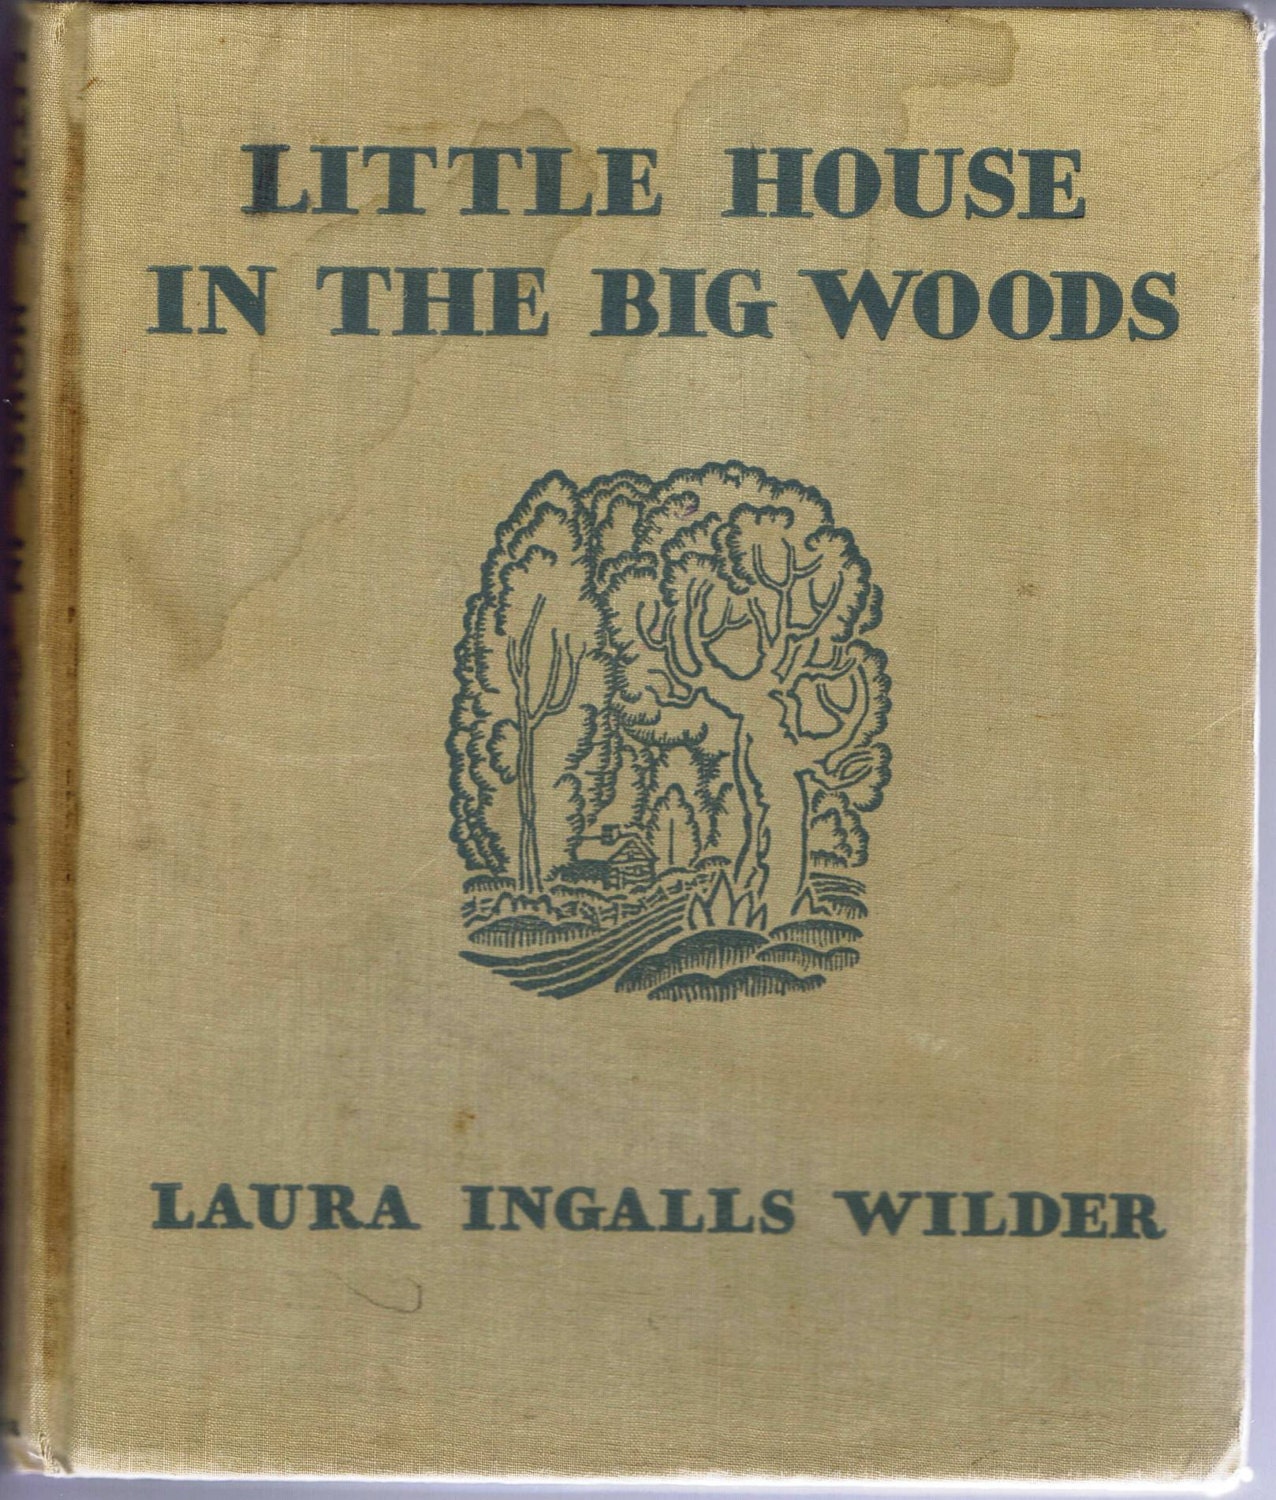 little house in the woods book